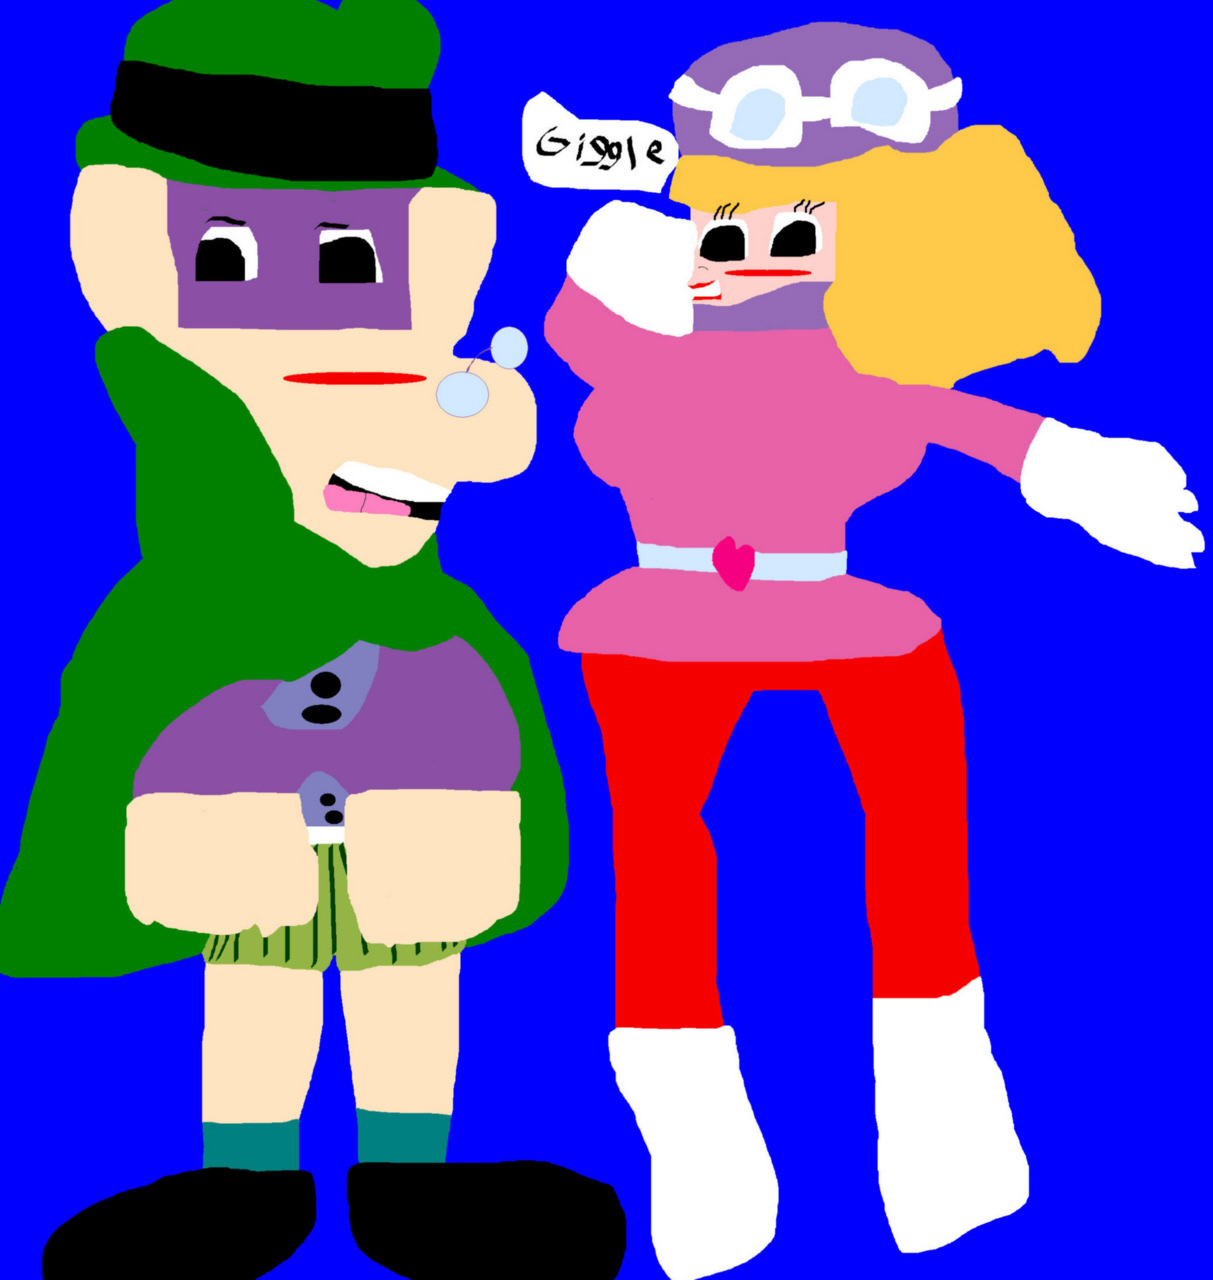 Hooded Claw Has Lost His Pants Penelope Pitstop Giggles MS Paint by Falconlobo